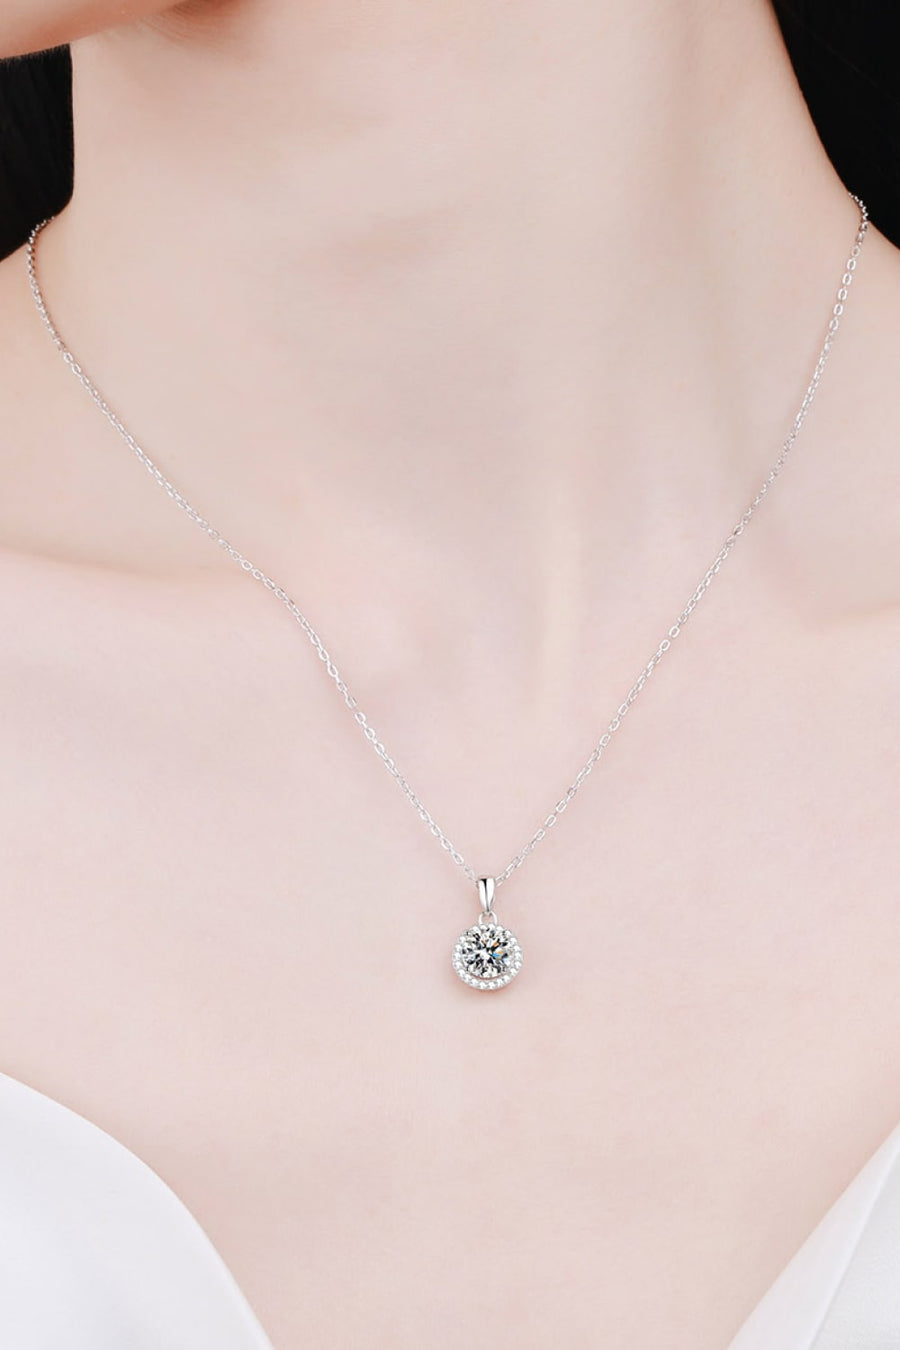 Best Diamond Necklace Jewelry Gifts for Women | 1 Carat Round Diamond Pendant Necklace - Chance to Charm | MASON New York